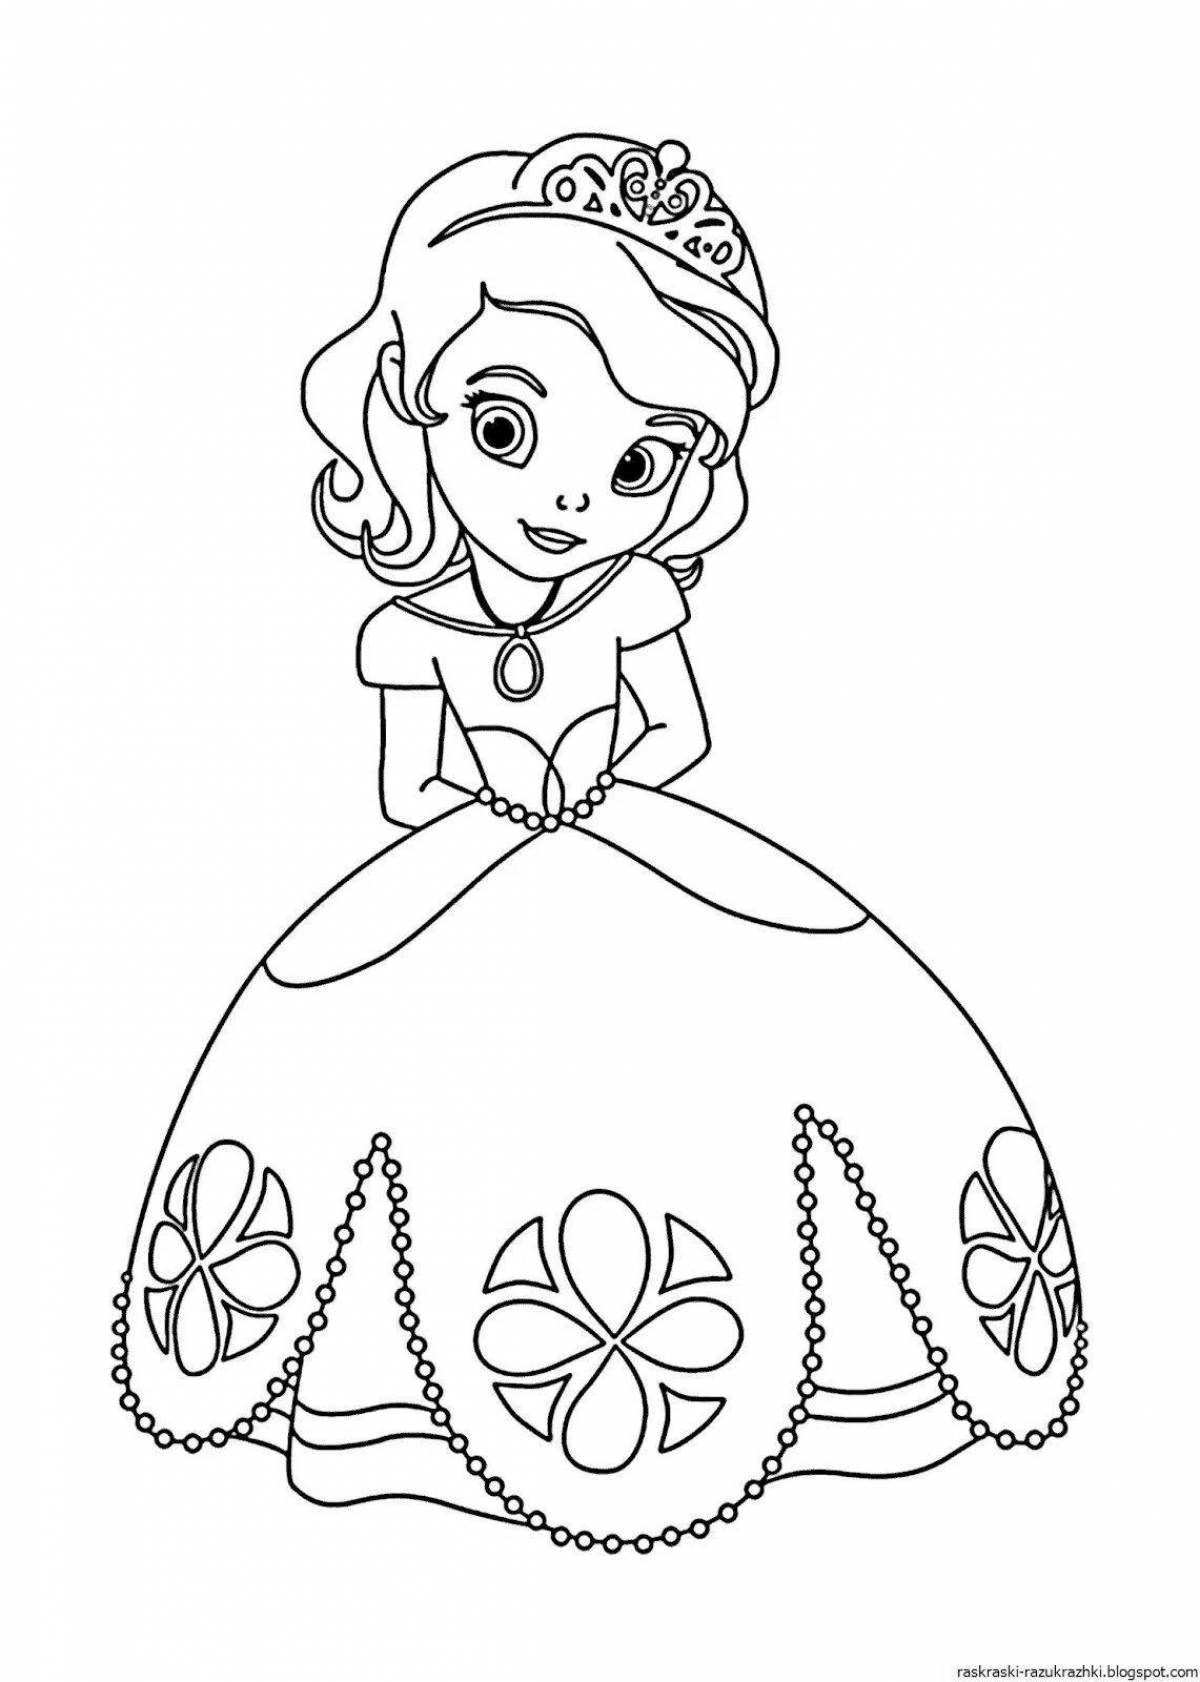 Exquisite princess coloring pages for girls 4-5 years old